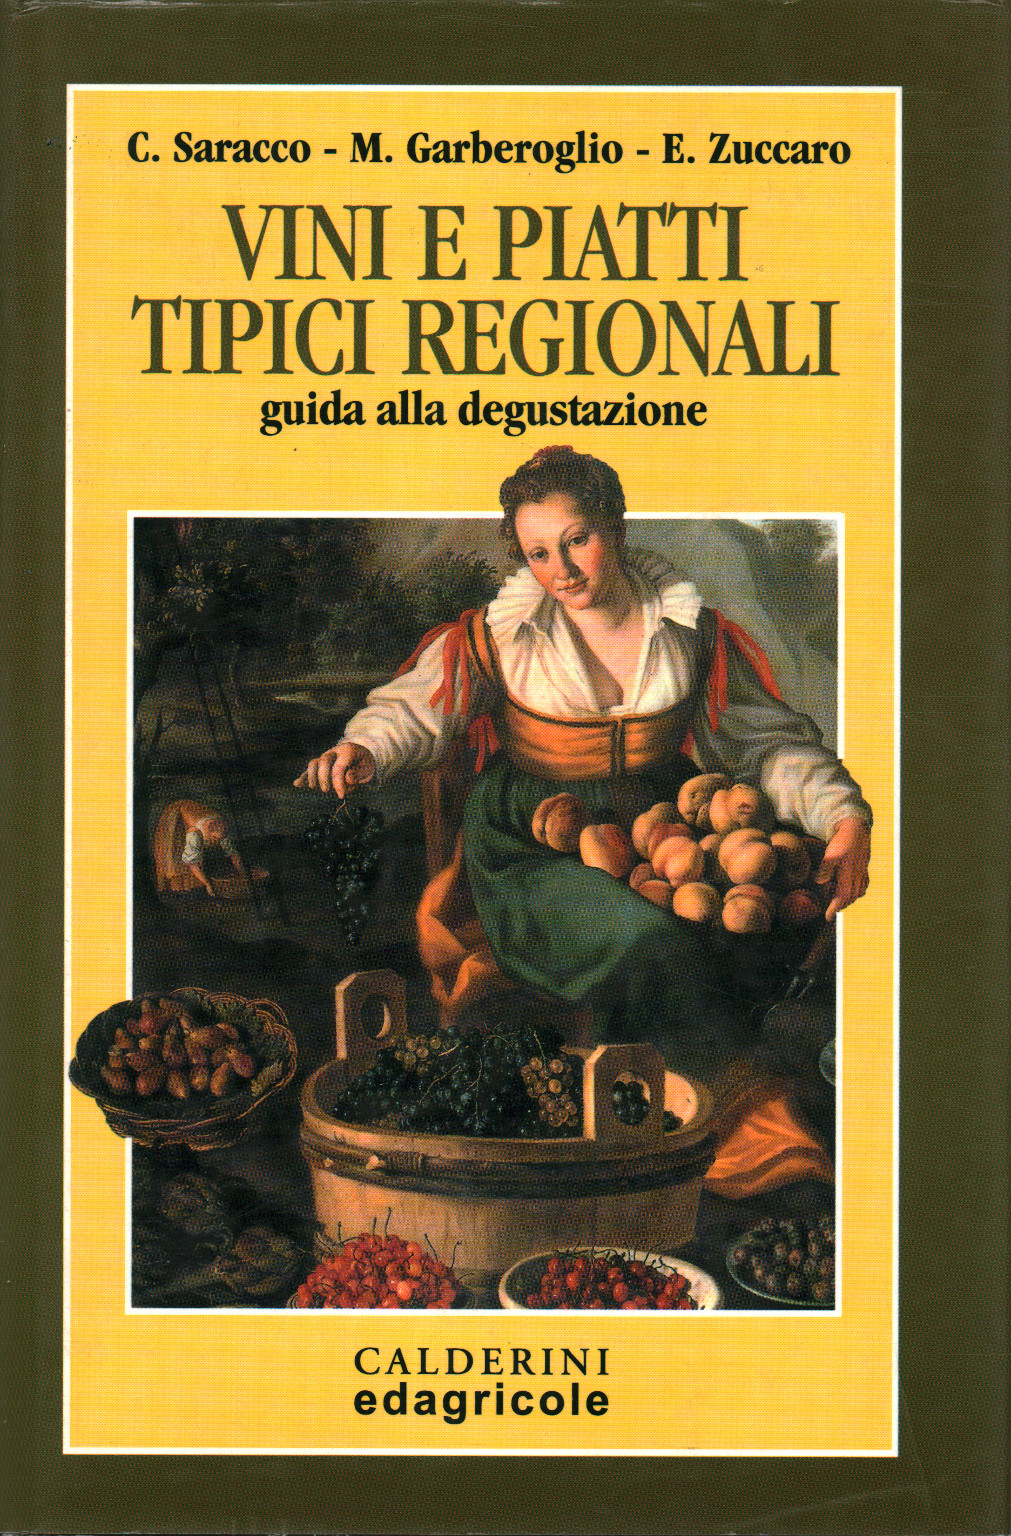 Wines and typical regional dishes, s.a.